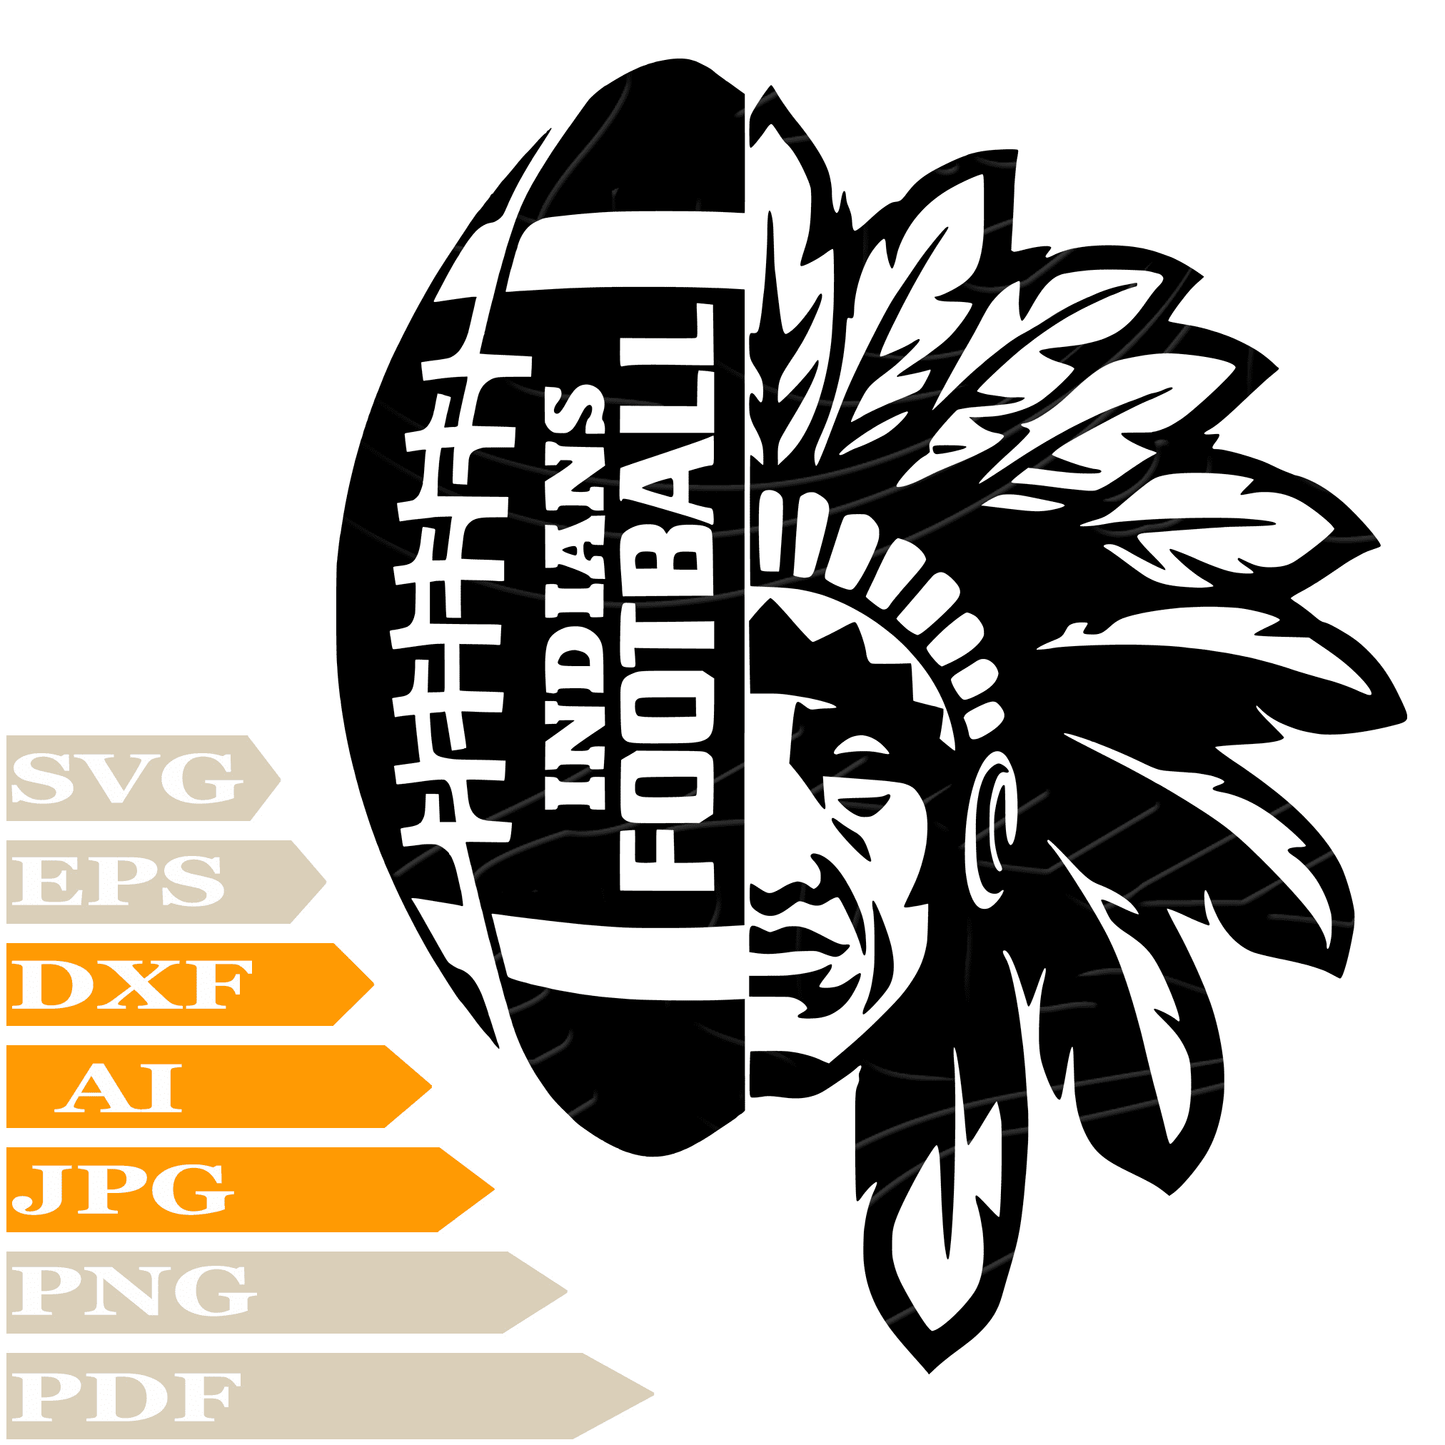 American Football SVG-Indians SVG File-Indians Football Logo Design-Native American Drawing SVG-Indians Football Logo Vector Images-Indians Football Logo PNG-Indians Team Mascot For Cricut-Indians Football Cut File-Indians Football Logo Clip art-Indians Football Team Mascot Illustration-Indians Football Logo Digital Instant Download-Indians Football For Shirts-Indians Printable-Indians Football Logo Silhouette